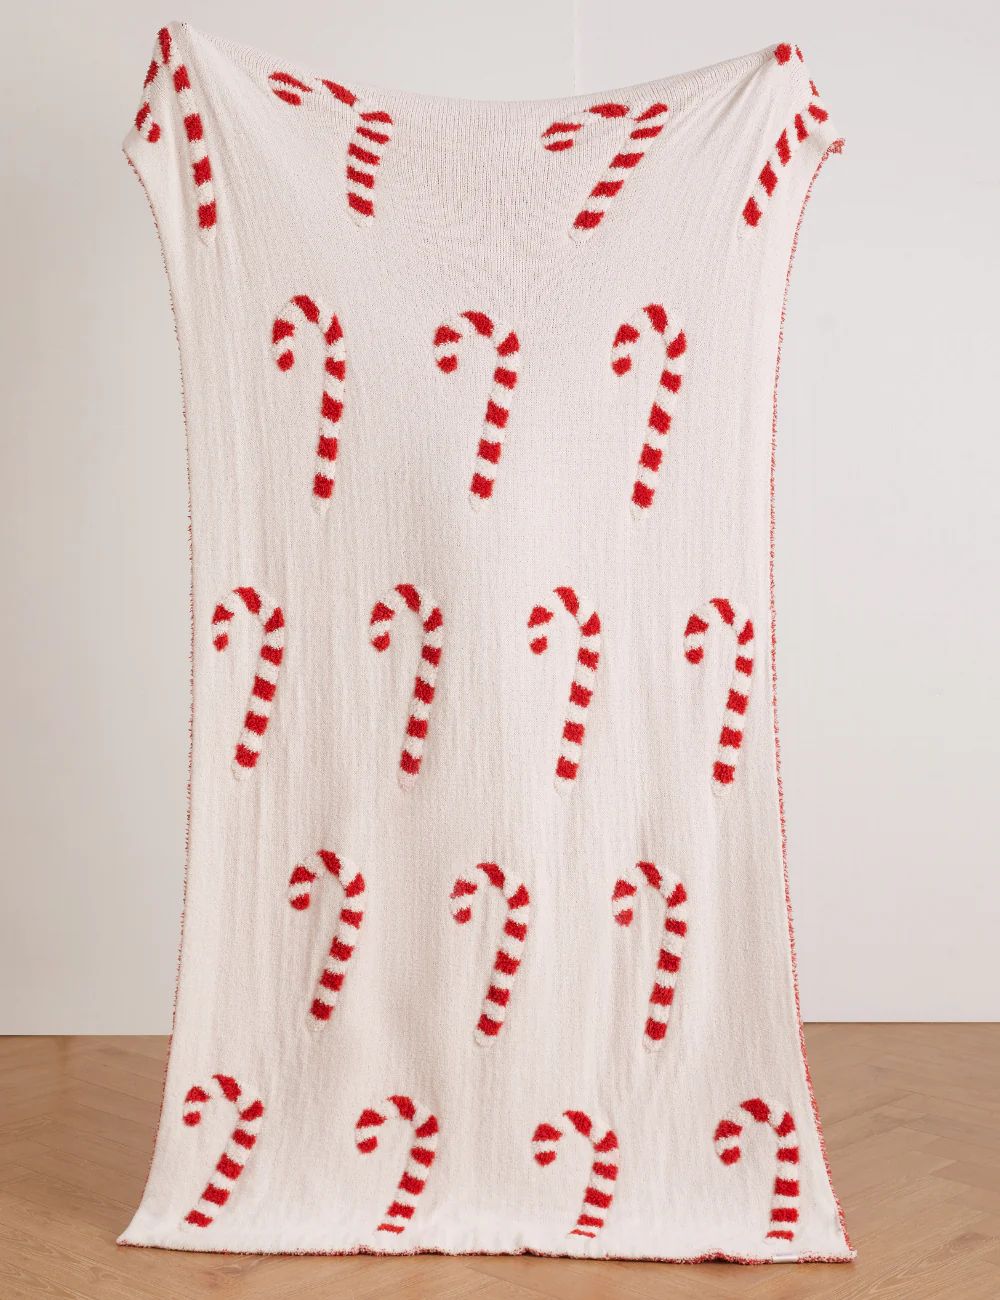 TSC x Madi Nelson: Candy Cane Buttery Blanket- Sold out | The Styled Collection